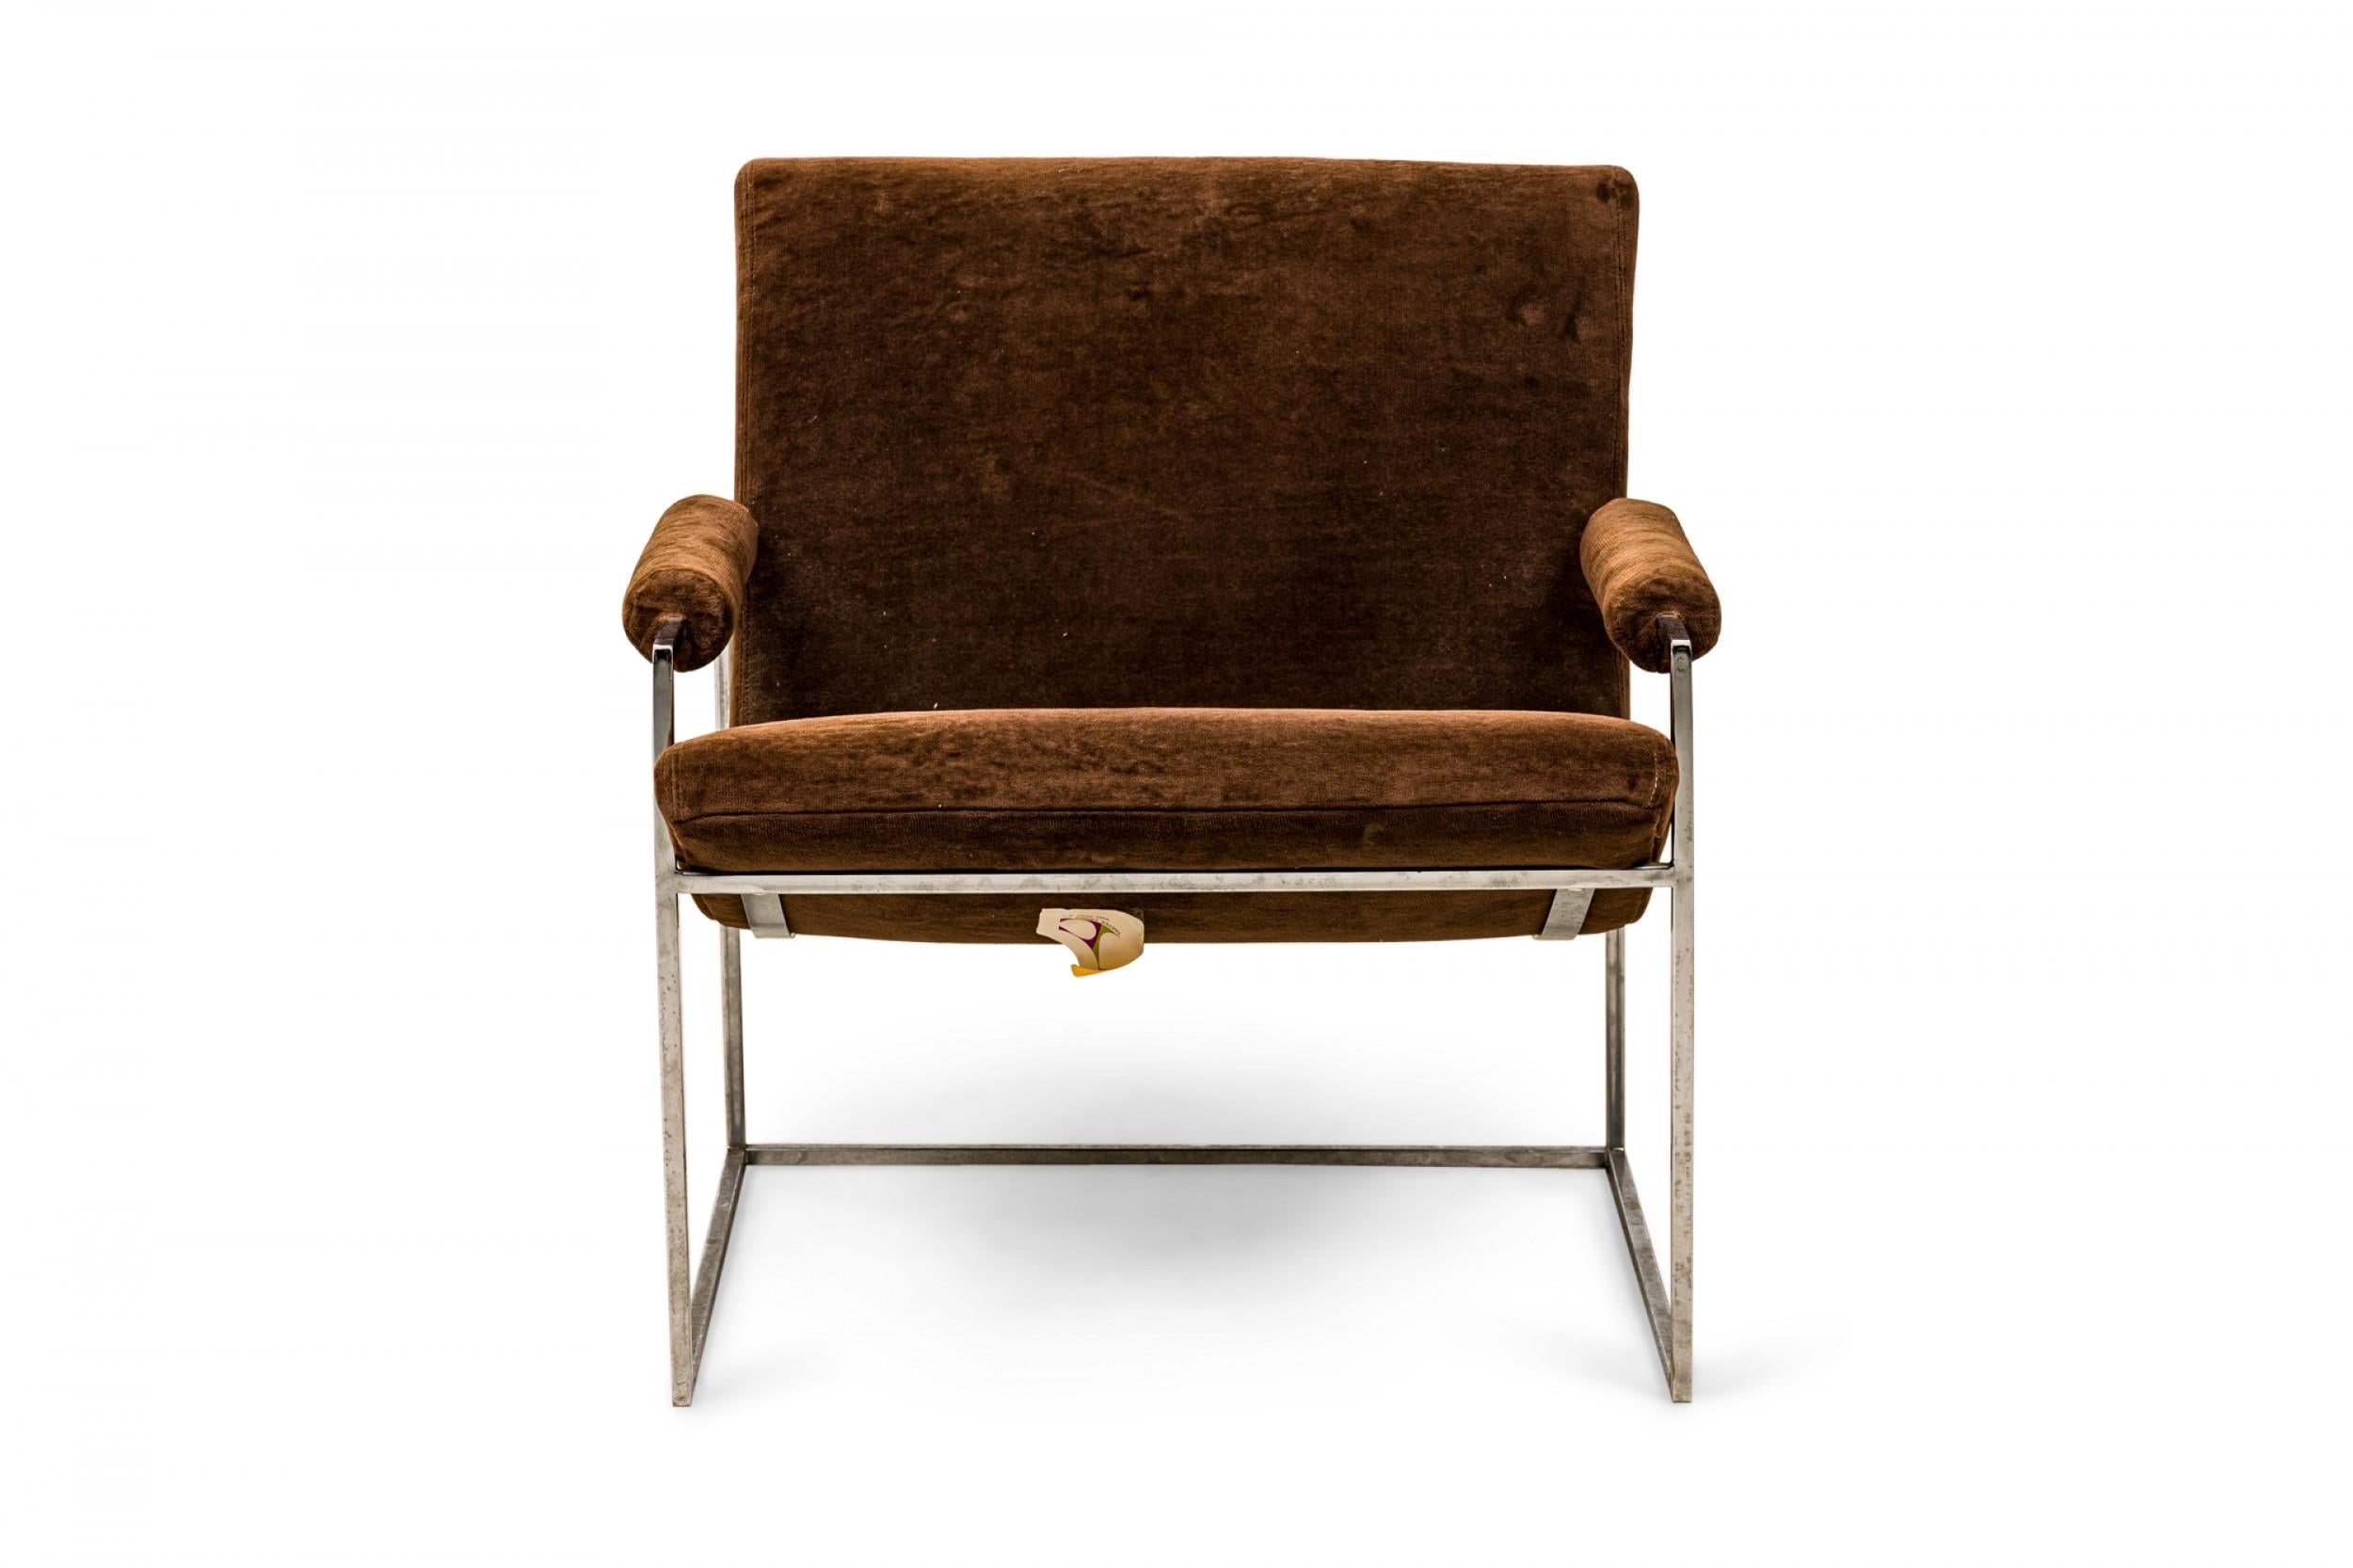 American Mid-Century scoop armchair with brown velour upholstered seat, back, and arms with button tufted detail along the seam where the seat and back join, supported by a thin square tube chrome frame and legs. (MILO BAUGHMAN FOR THAYER COGGIN)